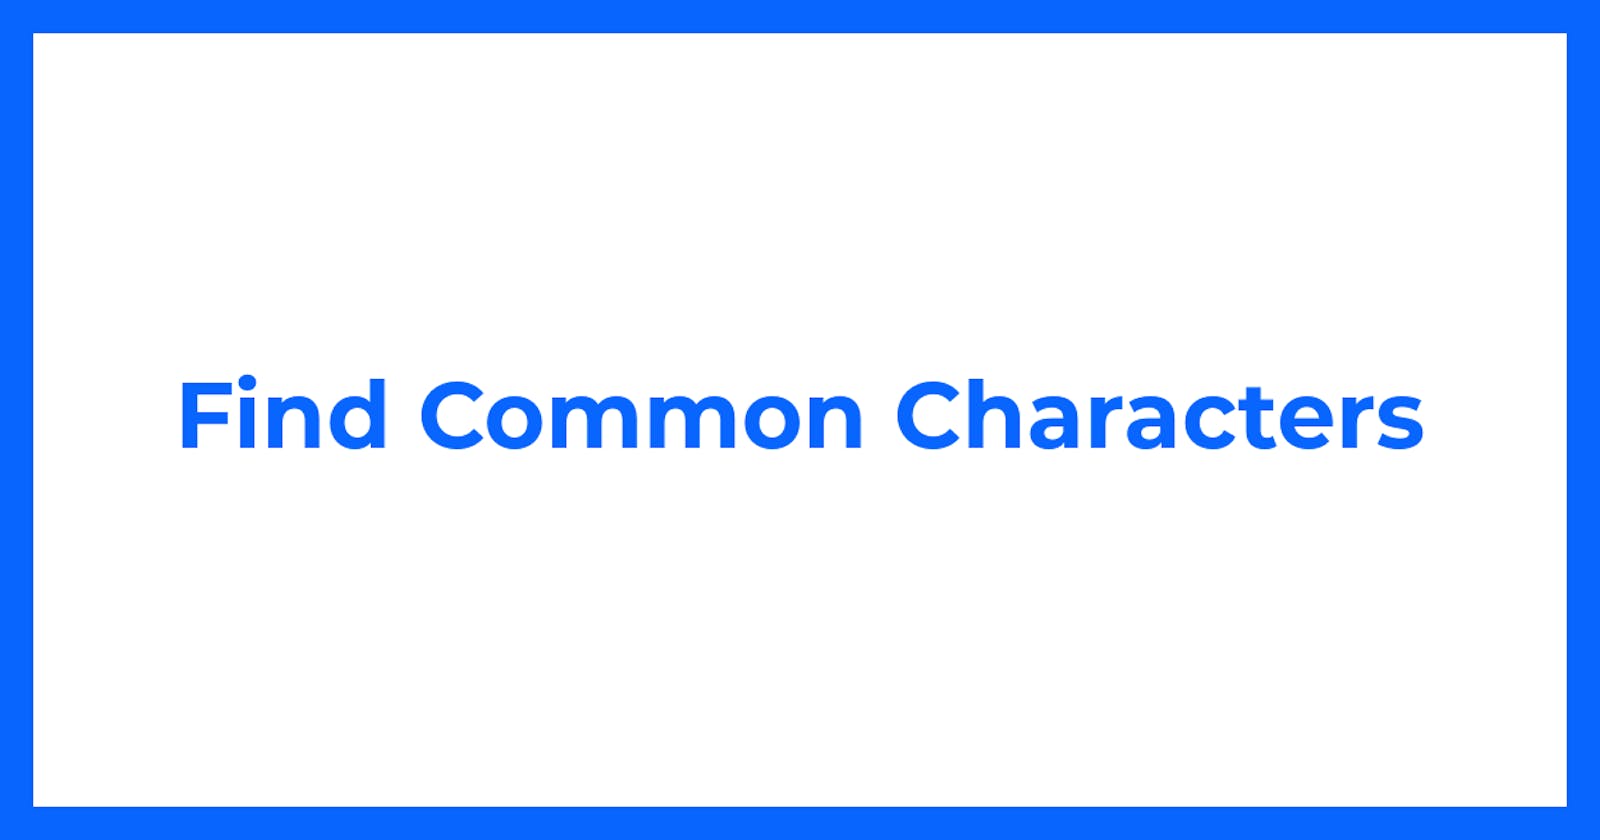 Find Common Characters